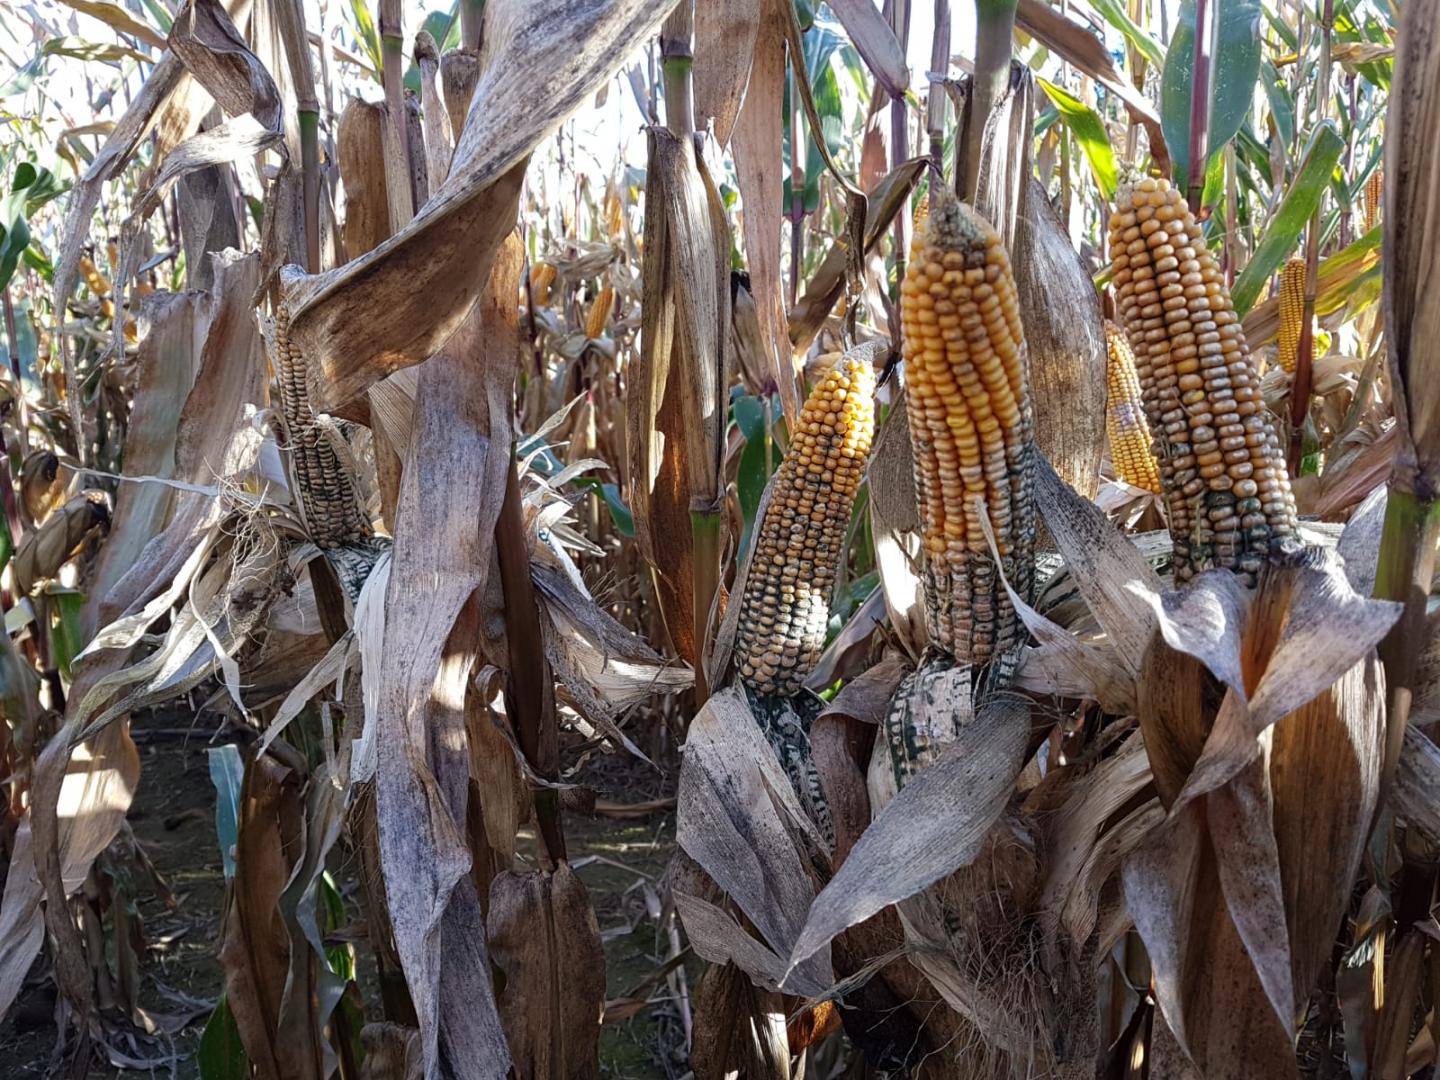 cobs of maize showing signs of fungus